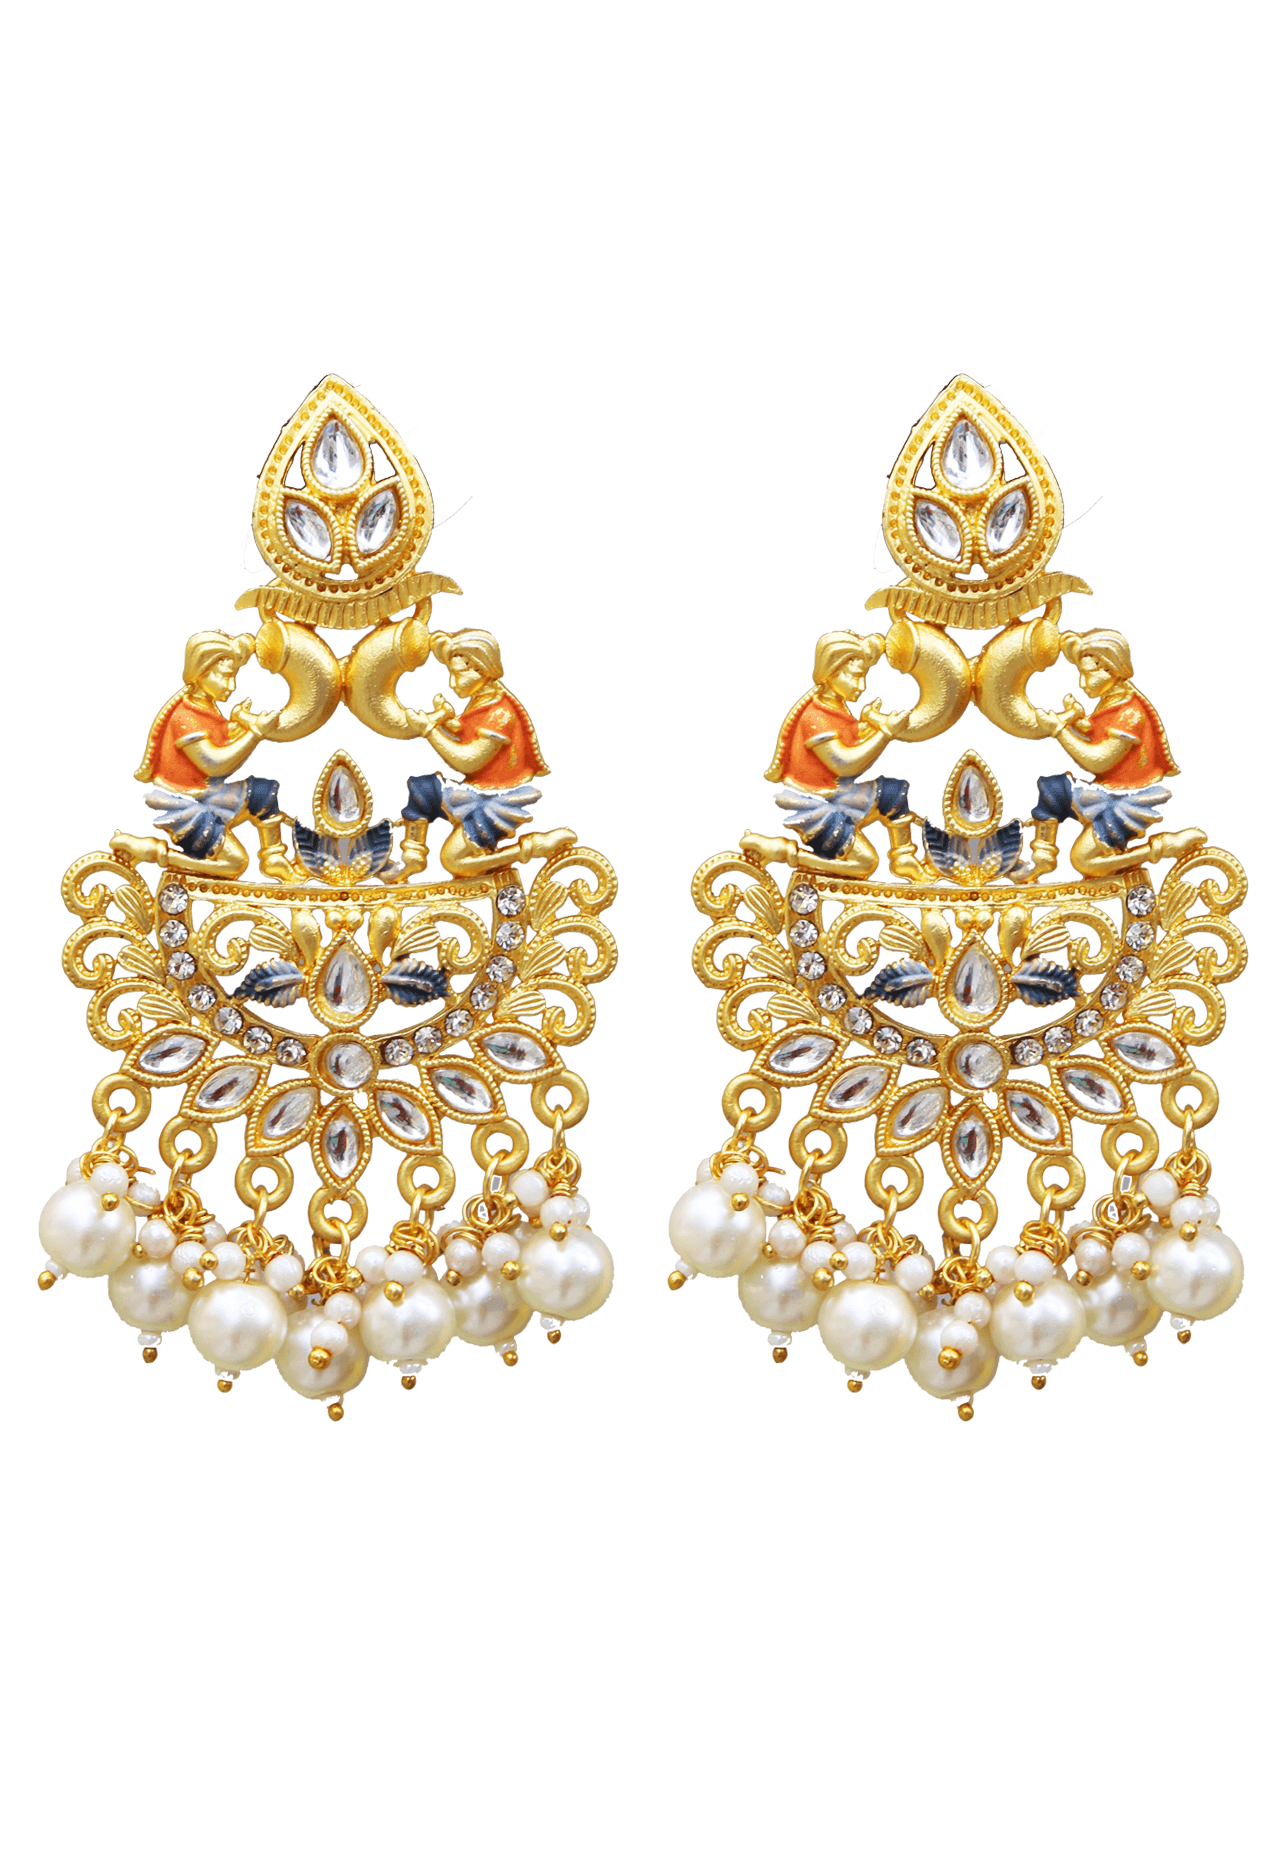 Temple Jewellery - 22K Gold Drop Earrings with Beads & Pearls -  235-GER16465 in 16.500 Grams